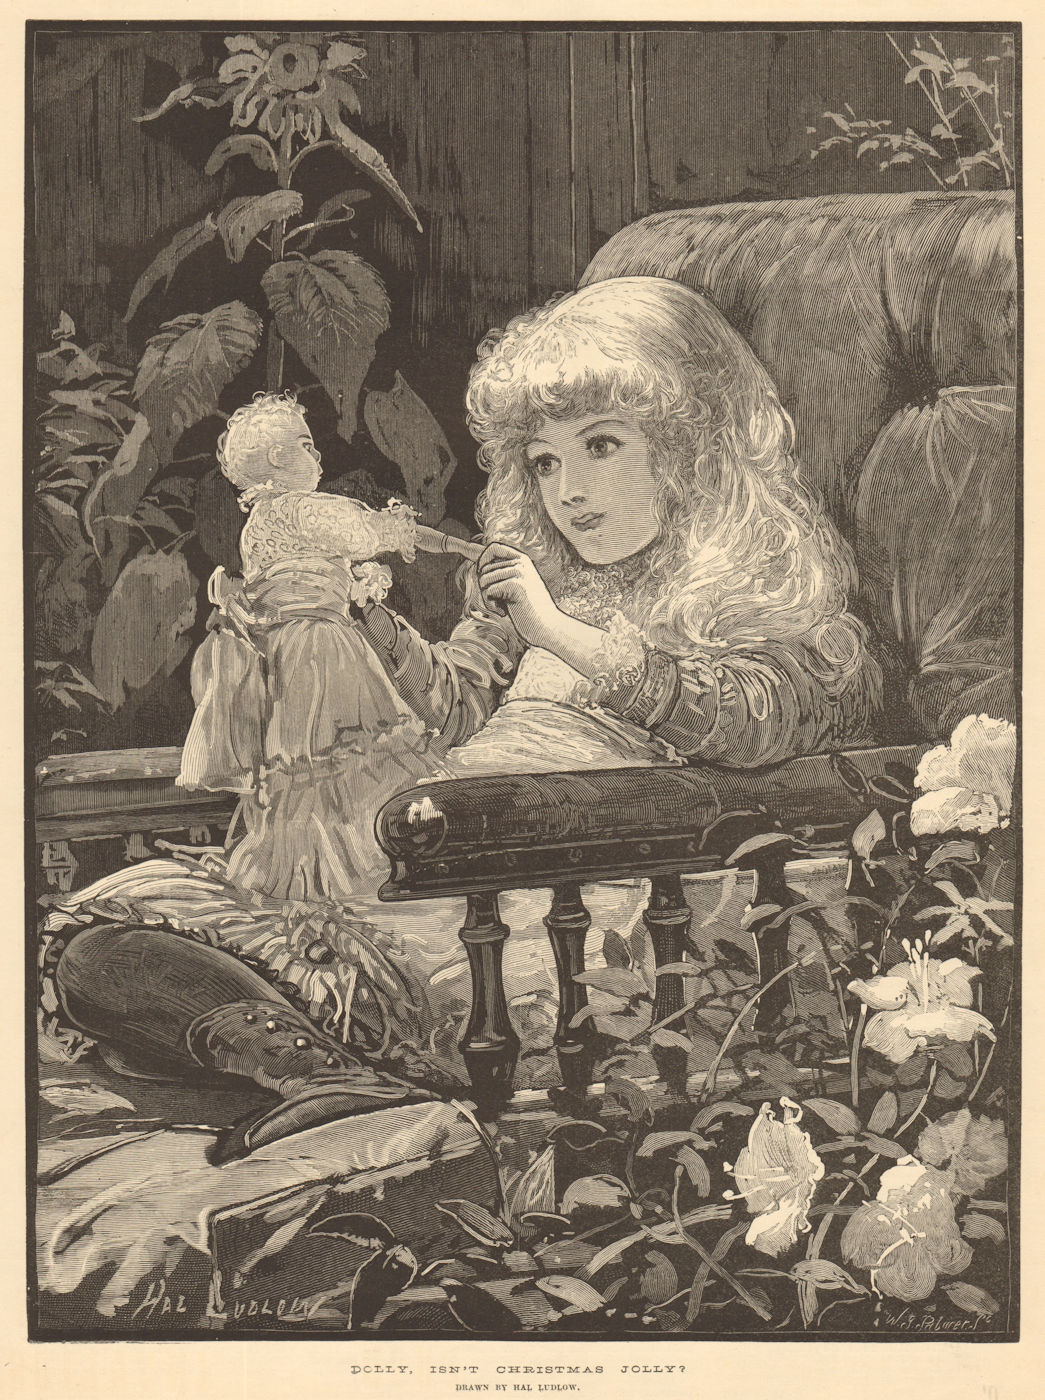 Associate Product "Dolly, isn't Christmas jolly?", drawn by Hal Ludlow 1883 ILN full page print